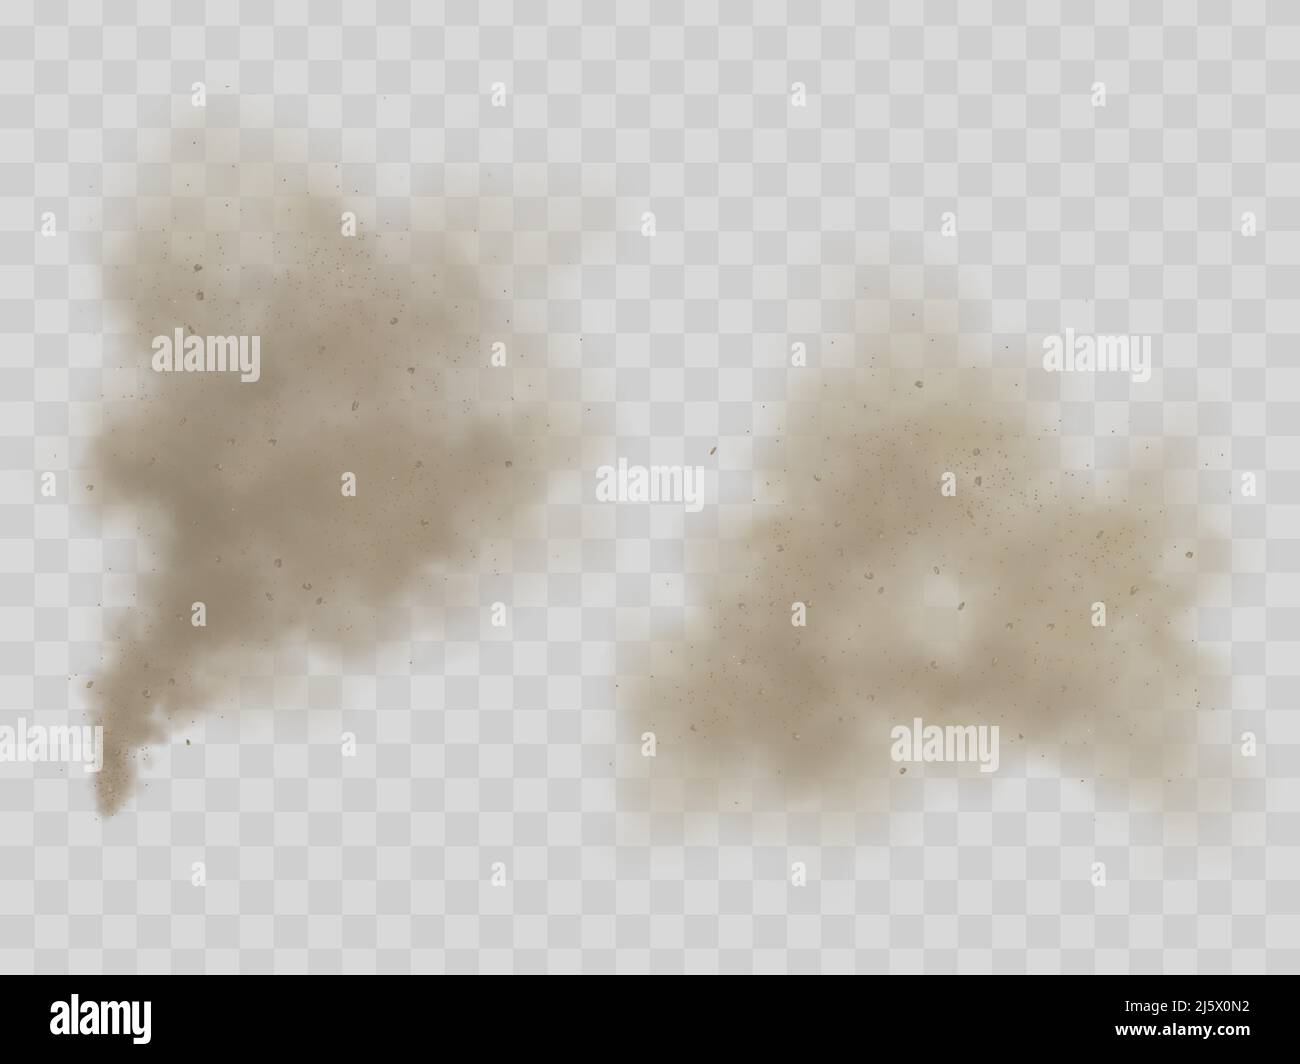 Clouds of smoke or dust with dirt microscopic particles 3d realistic vector illustration isolated on transparent background. House cleaning, environme Stock Vector